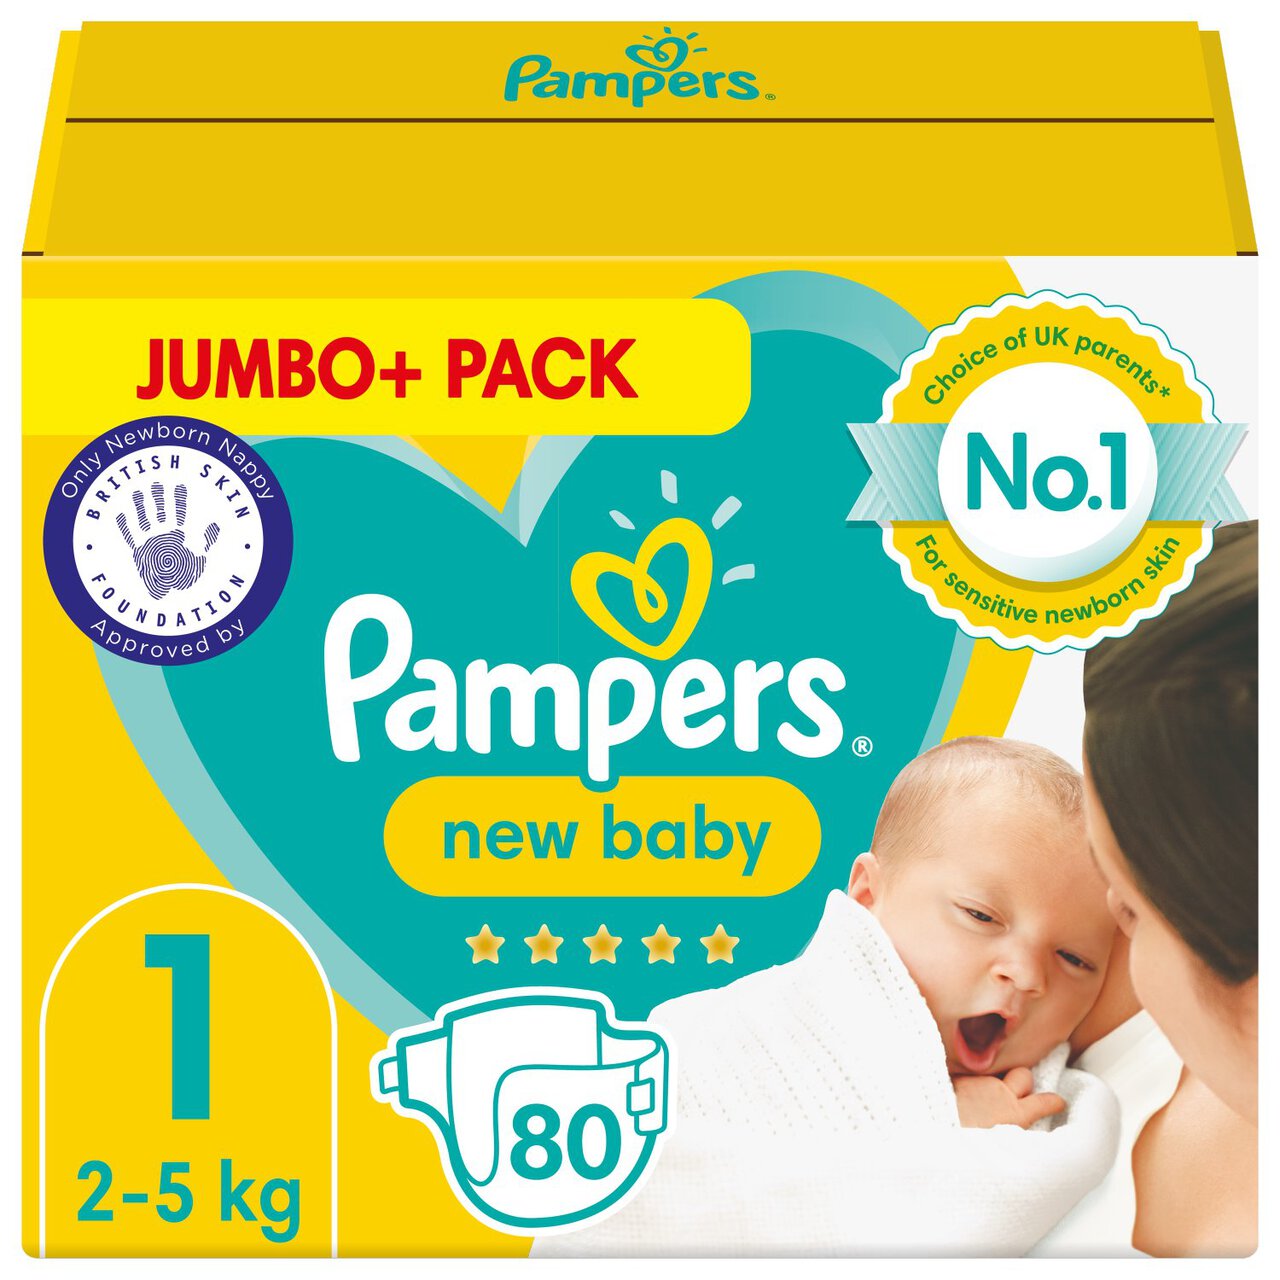 Pampers New Baby Nappies, Size 1 (2-5kg) Jumbo+ Pack 80 per pack